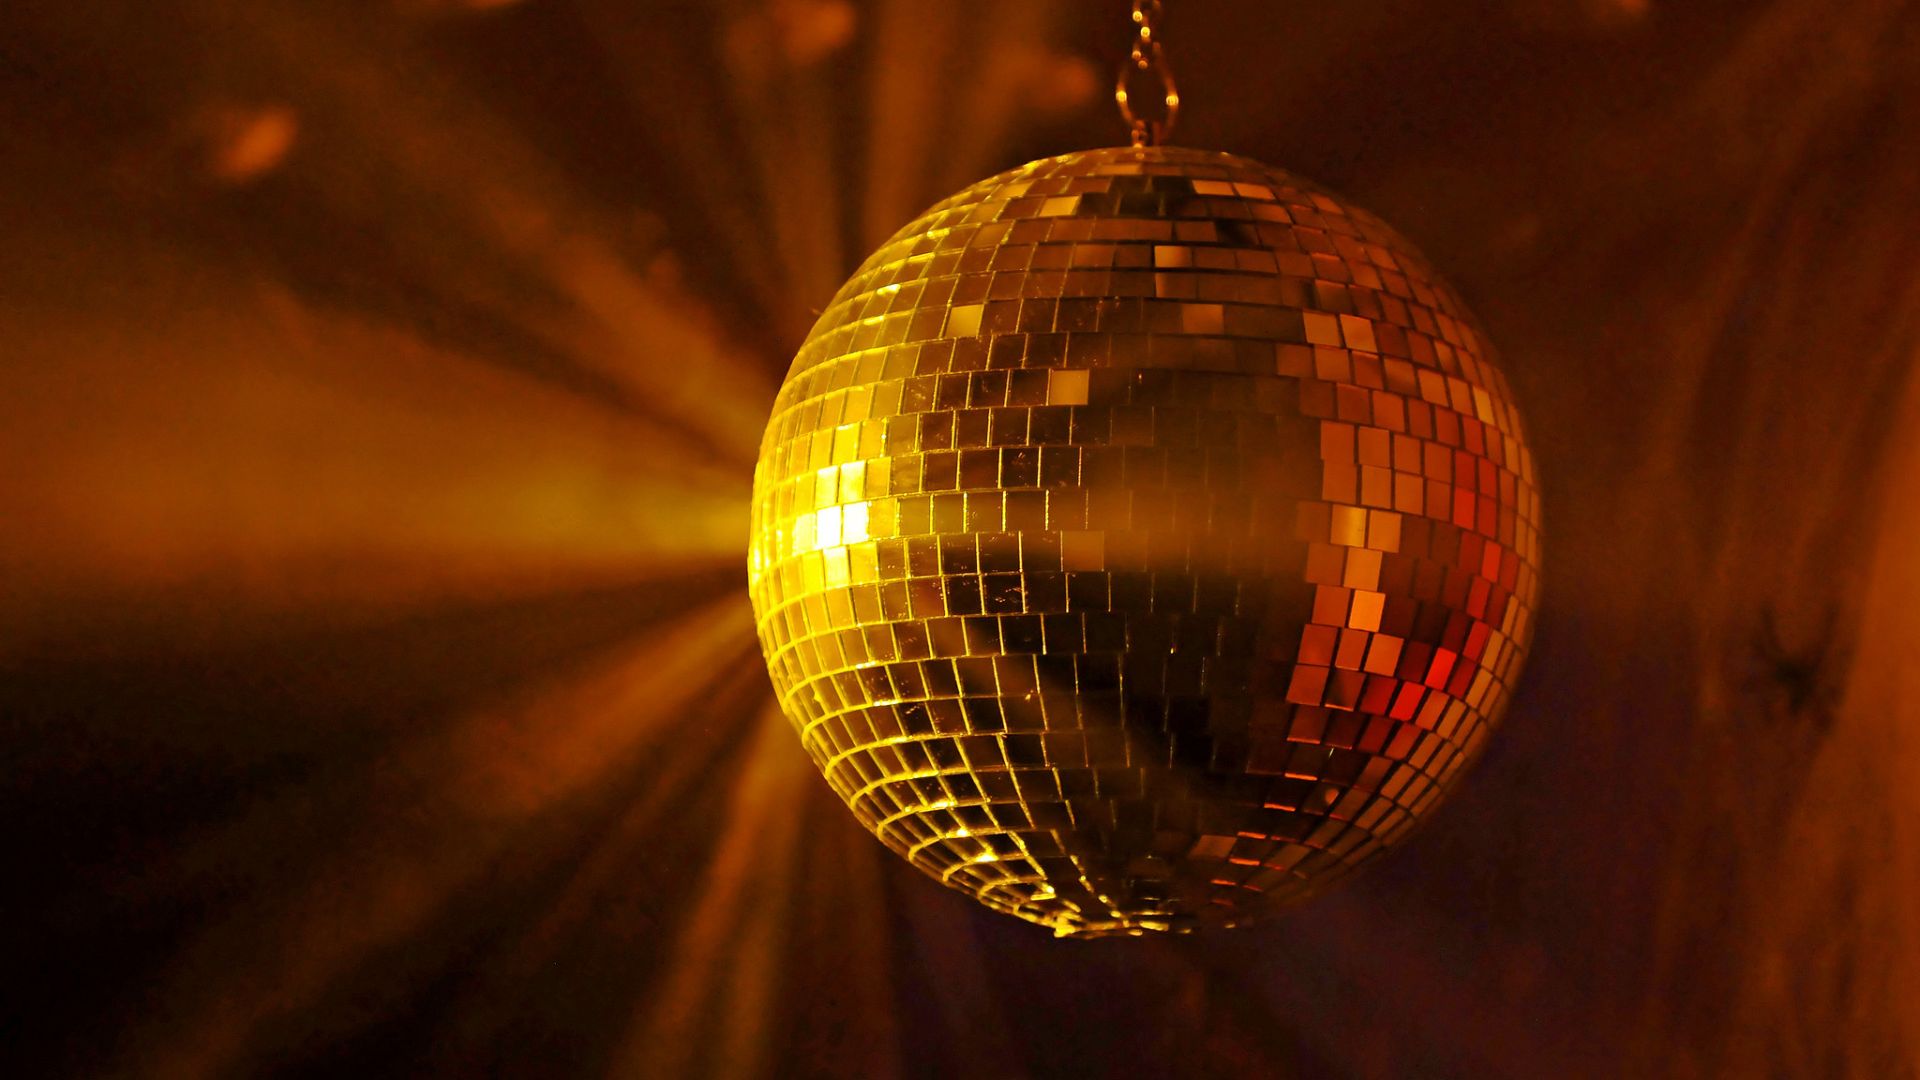 Disco: Soundtrack of a Revolution – a musical documentary by BBC